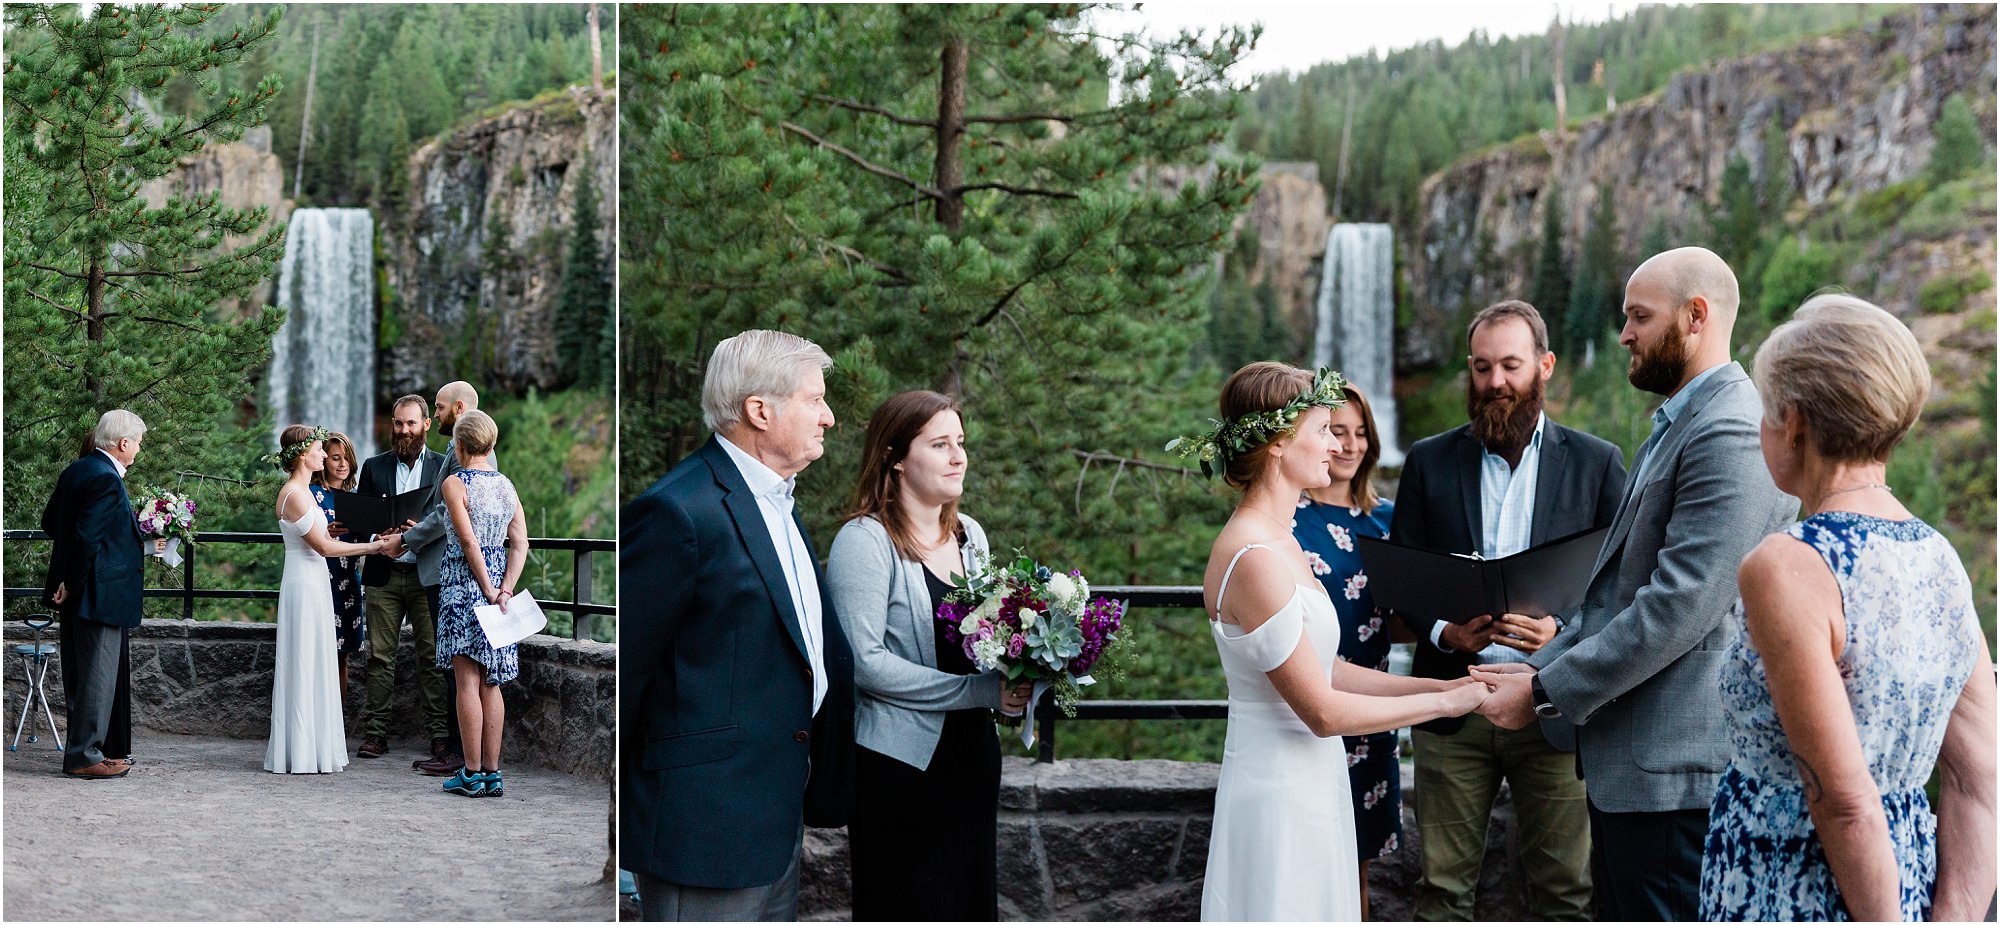 An intimate elopement ceremony with the bride and groom and family takes place at sunrise at the Tumalo Falls viewpoint in Bend, OR. | Erica Swantek Photography